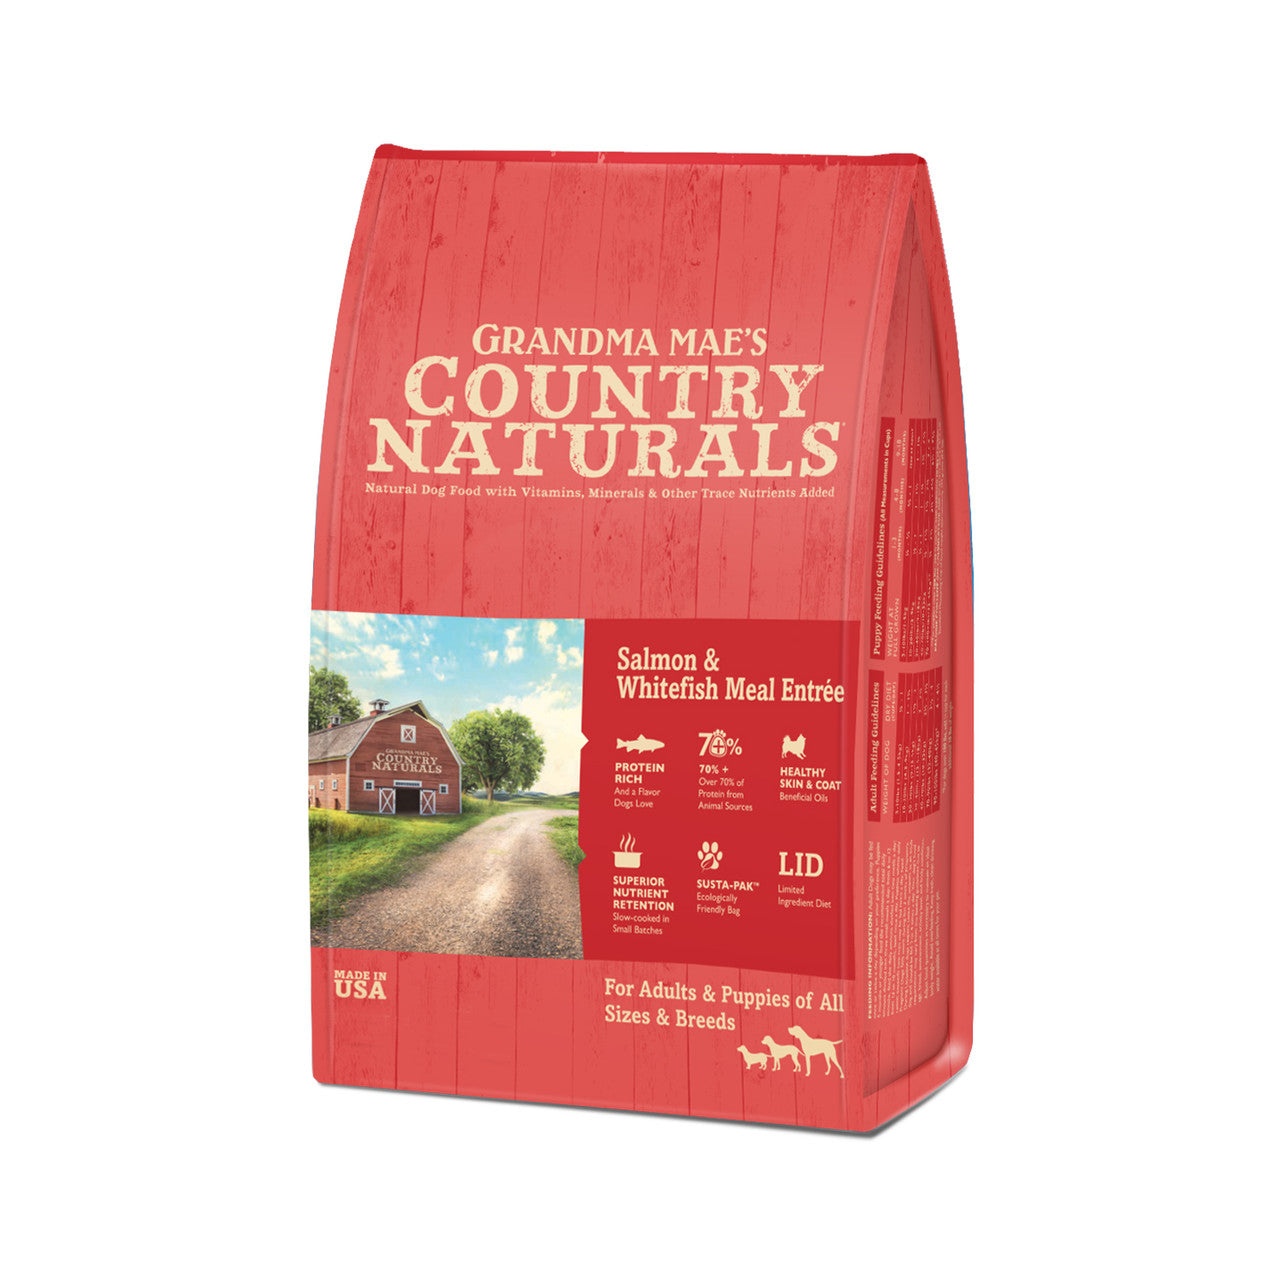 Grandma Mae's Country Naturals Dry Dog Food Salmon & Whitefish Meal 25lb